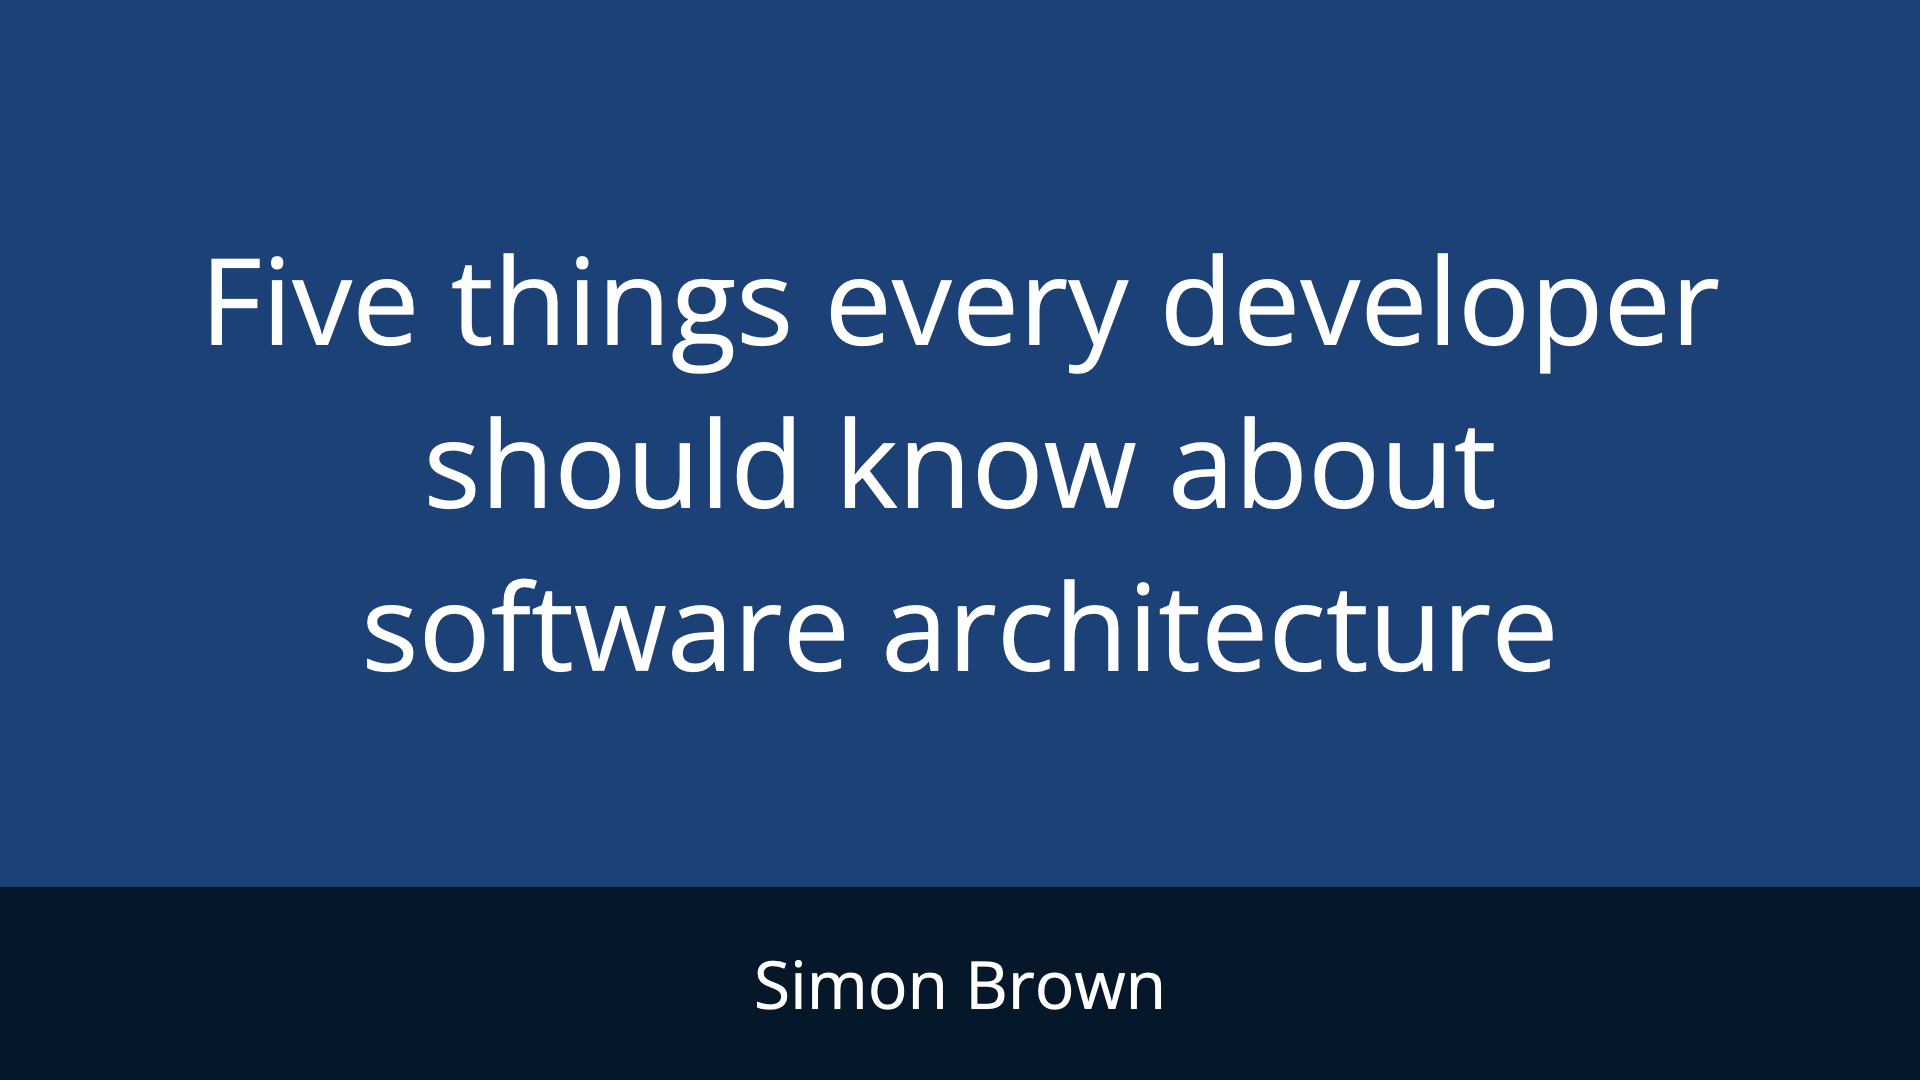 Five things every developer should know about software architecture